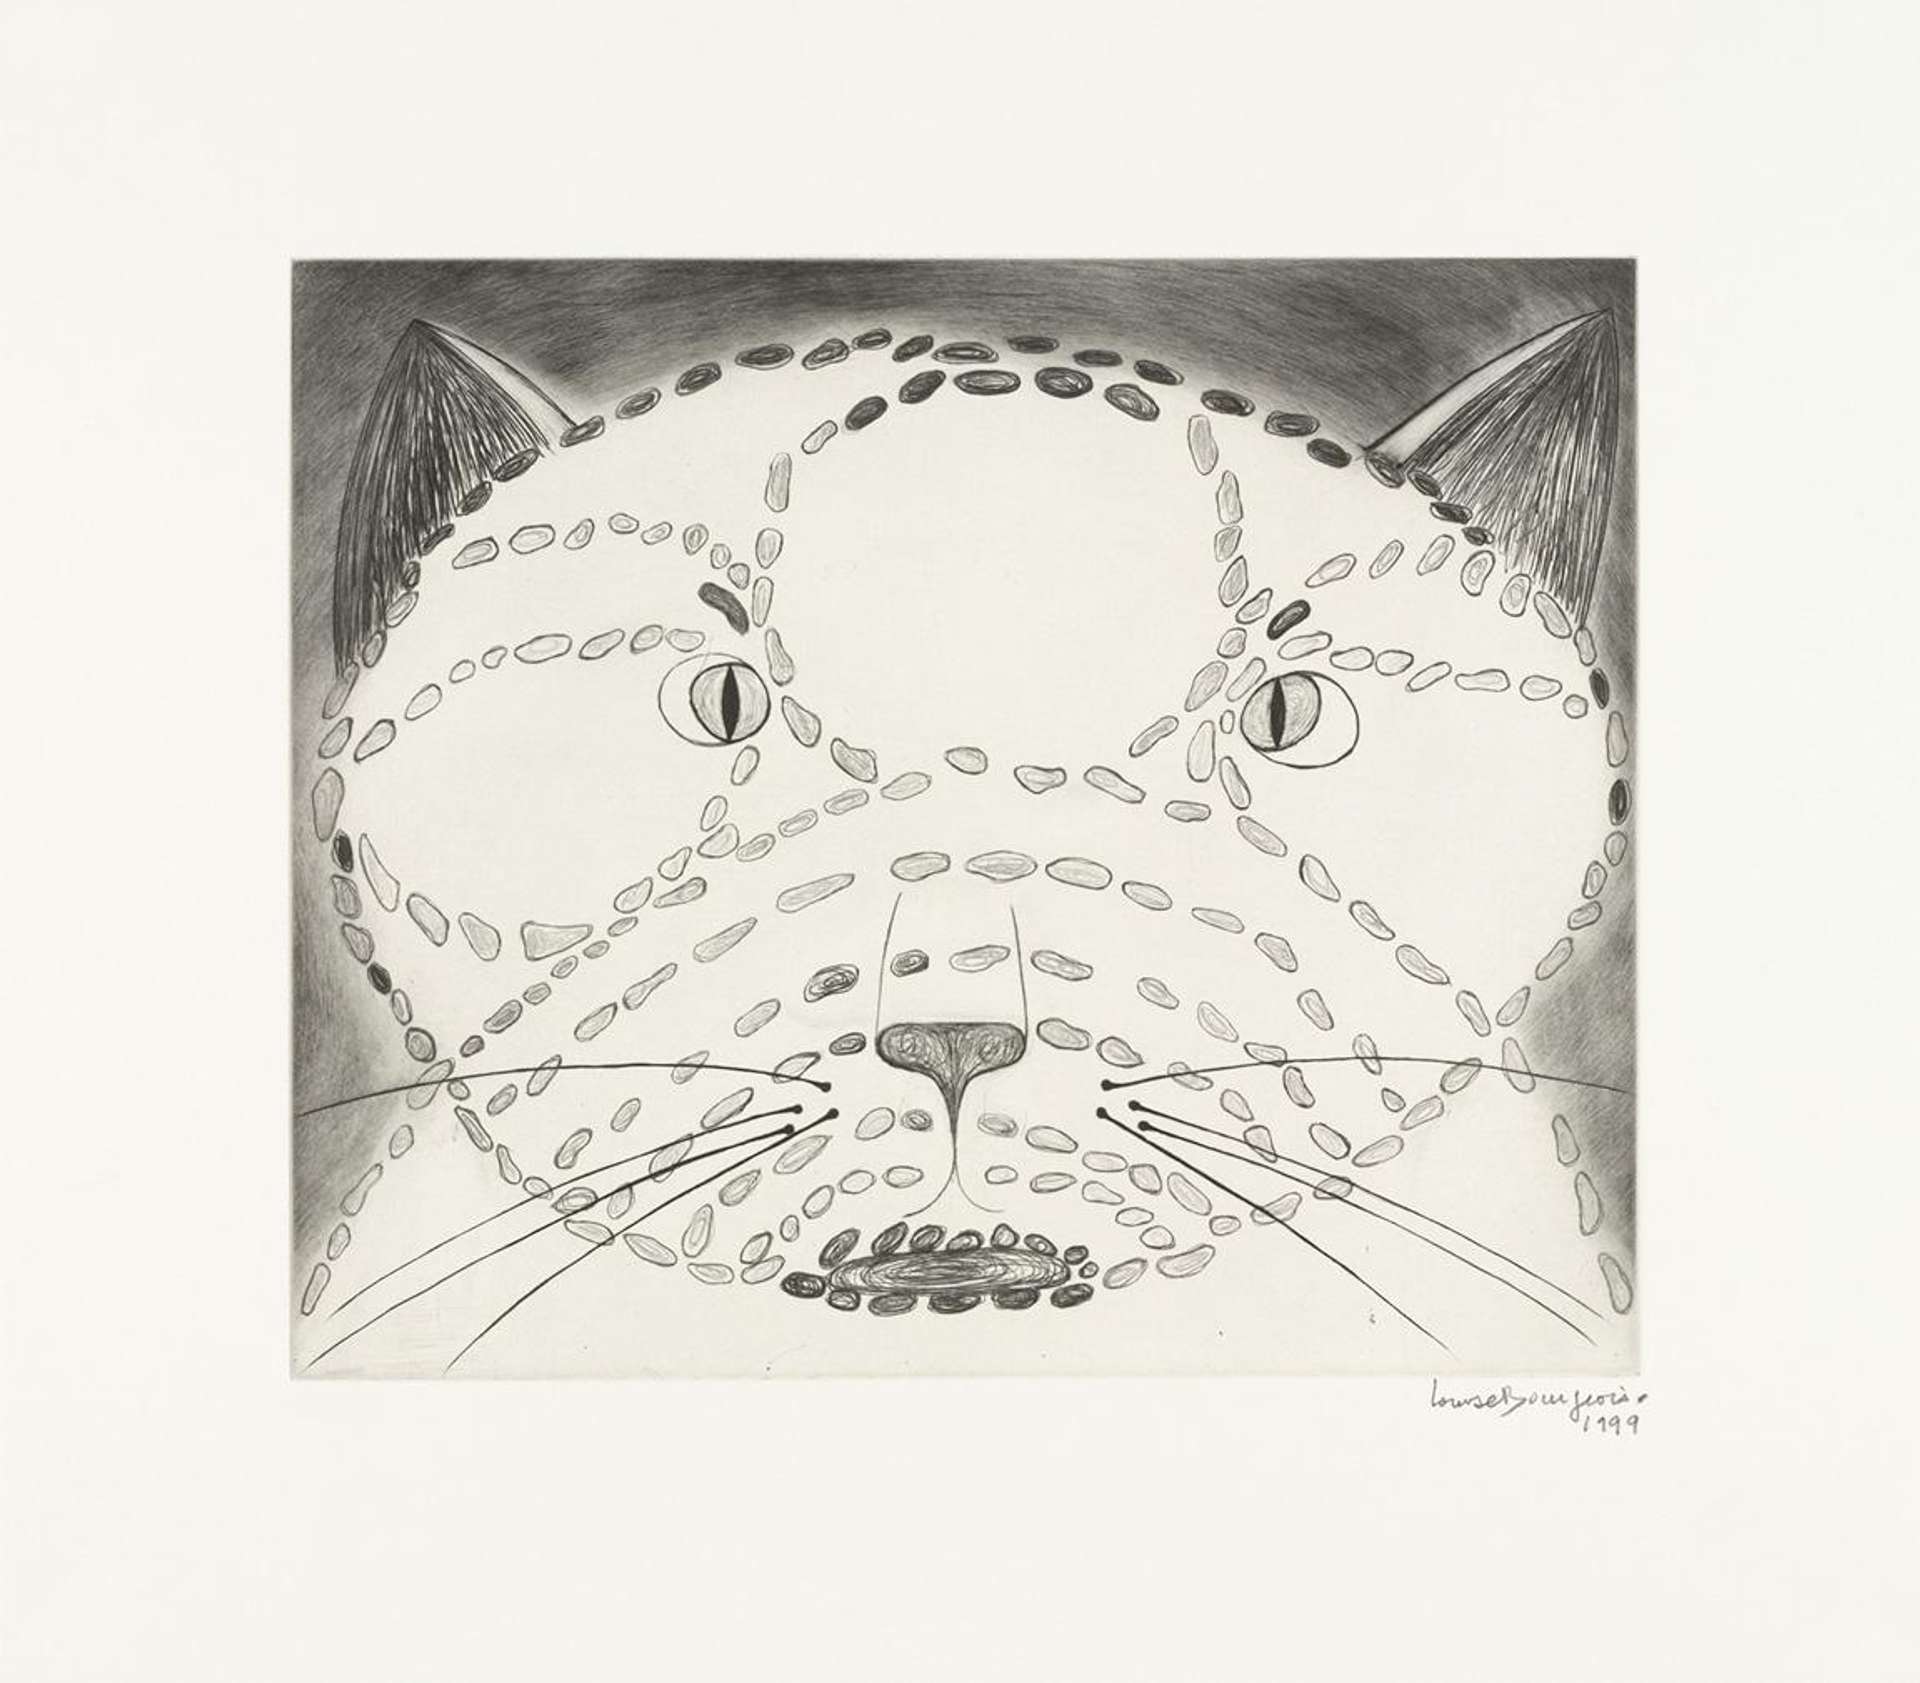 Louise Bourgeois’ The Angry Cat. A drypoint print of a cat’s face, upclose.